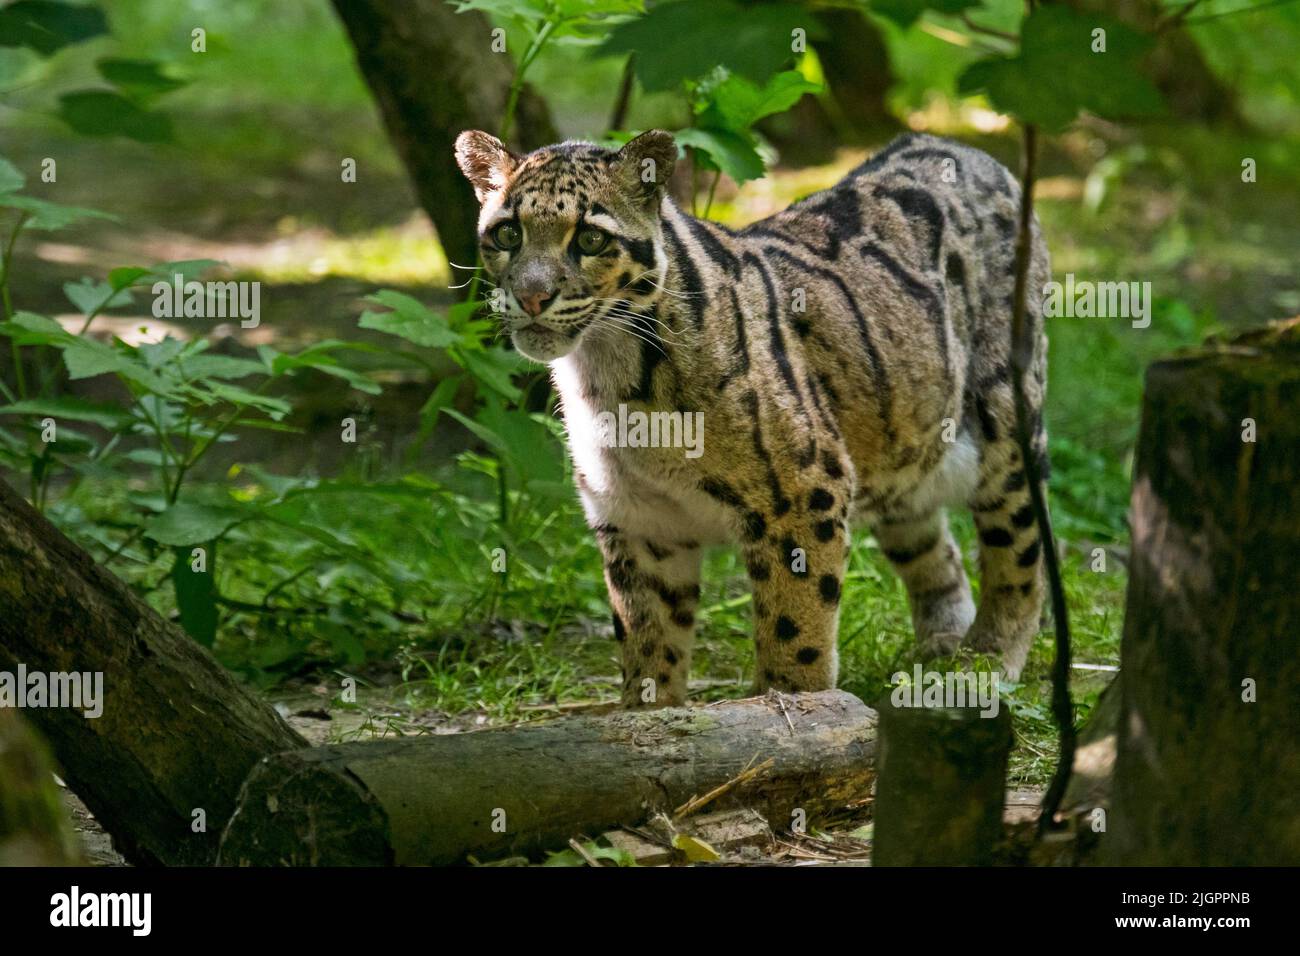 Mainland clouded leopard (Neofelis nebulosa) native from the Himalayas to Southeast Asia into South China at the zoo Parc des Félins, France Stock Photo